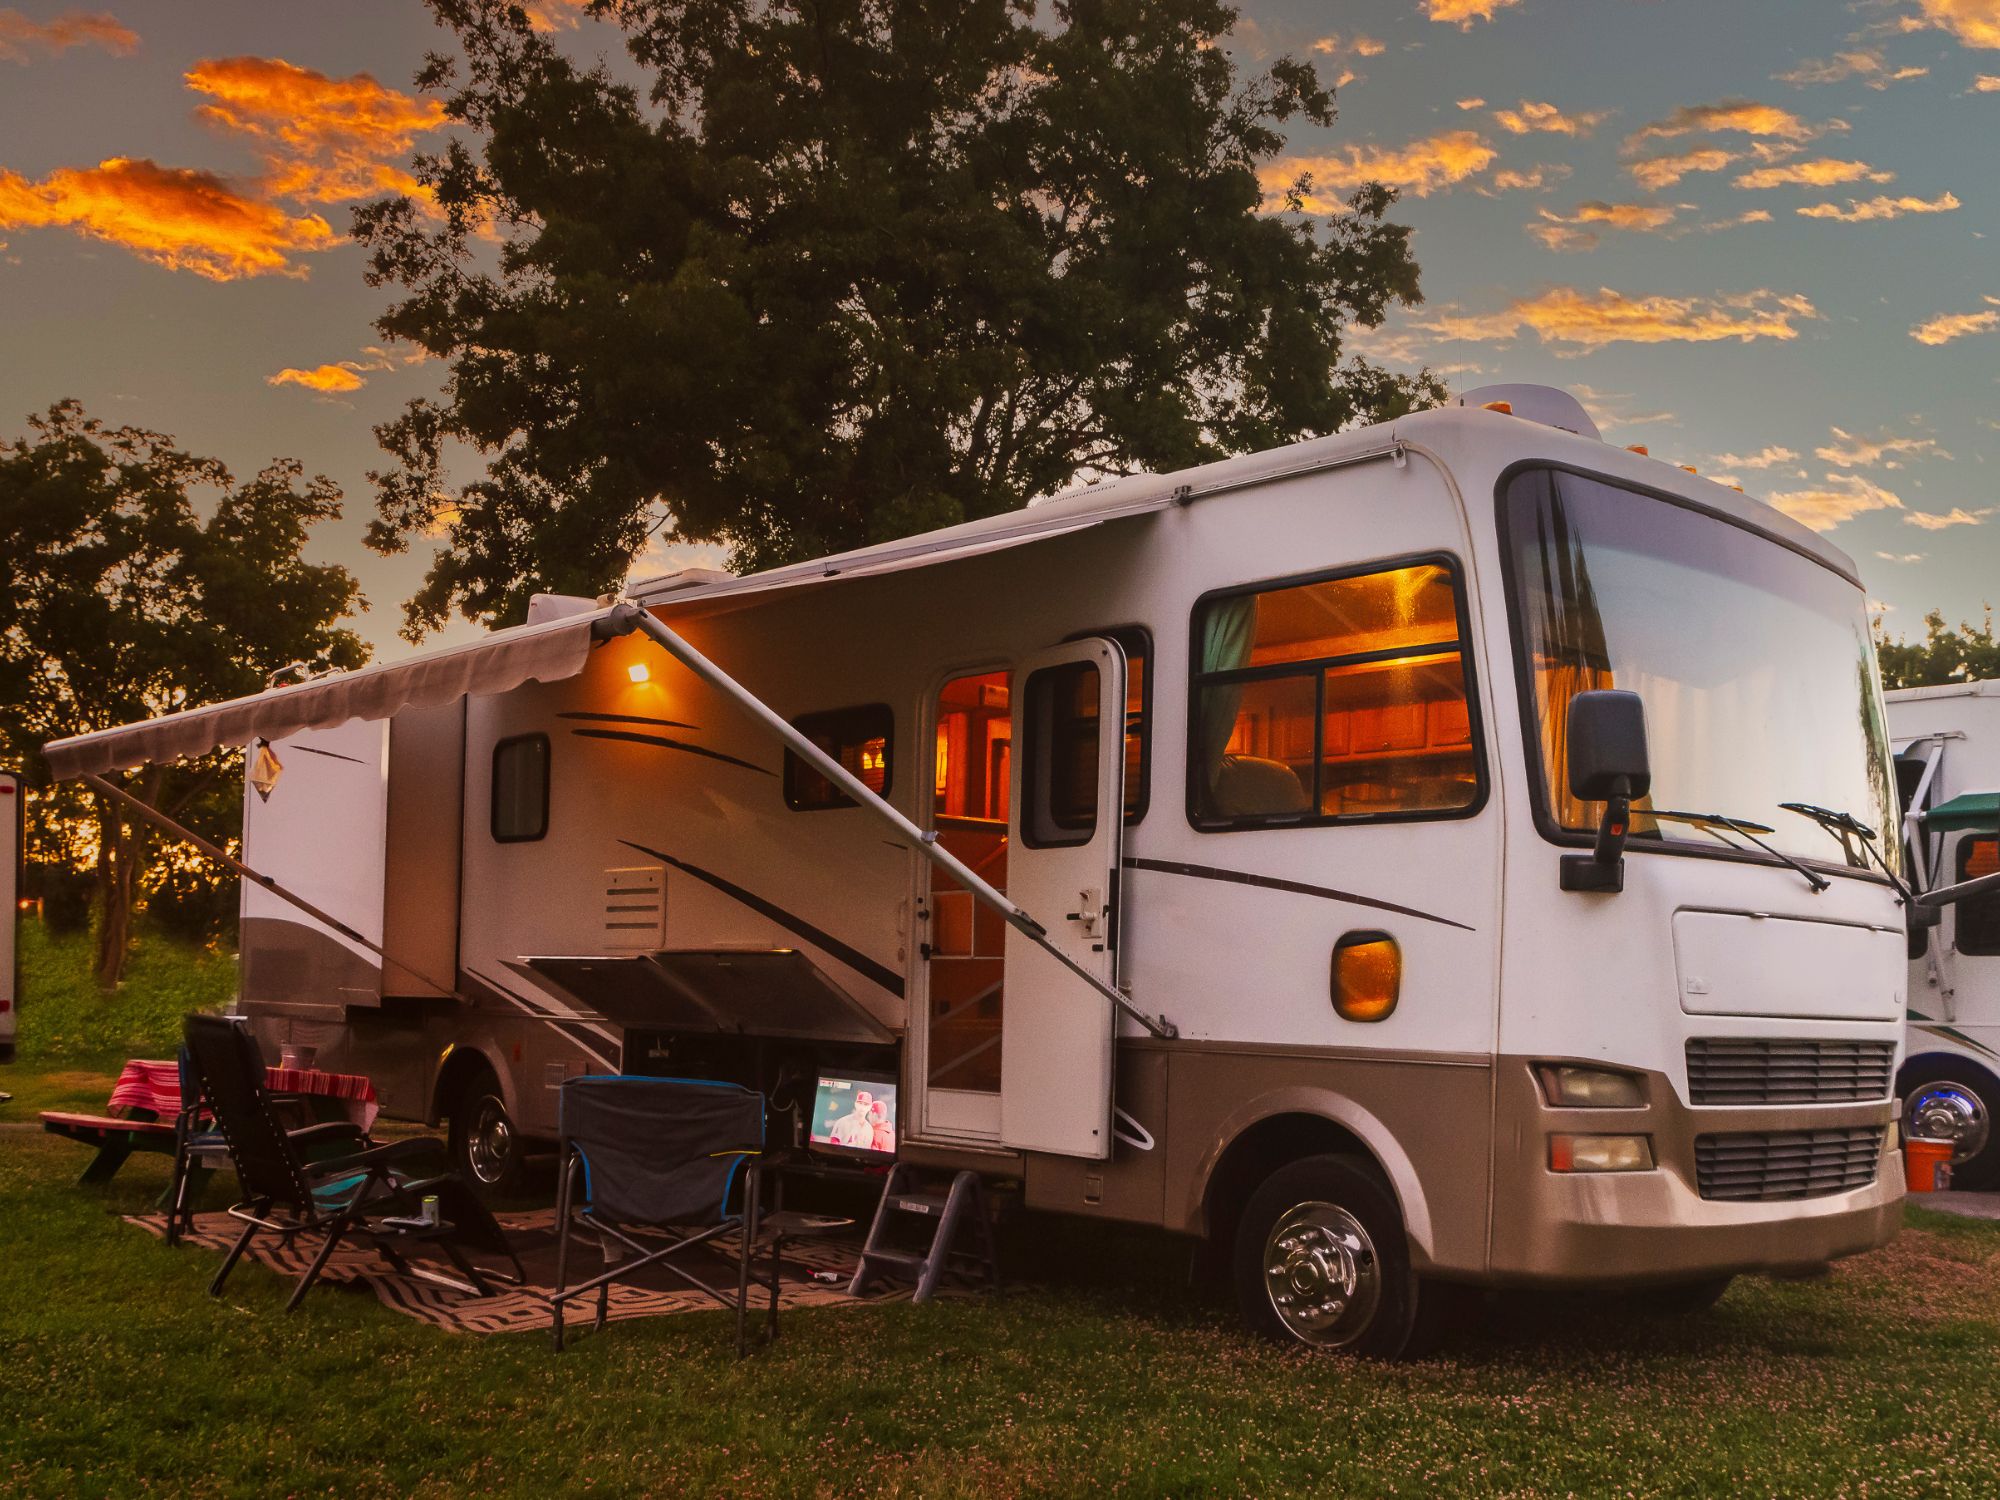 The Most Helpful Tips When Camping in an RV - Texas Outdoors Network